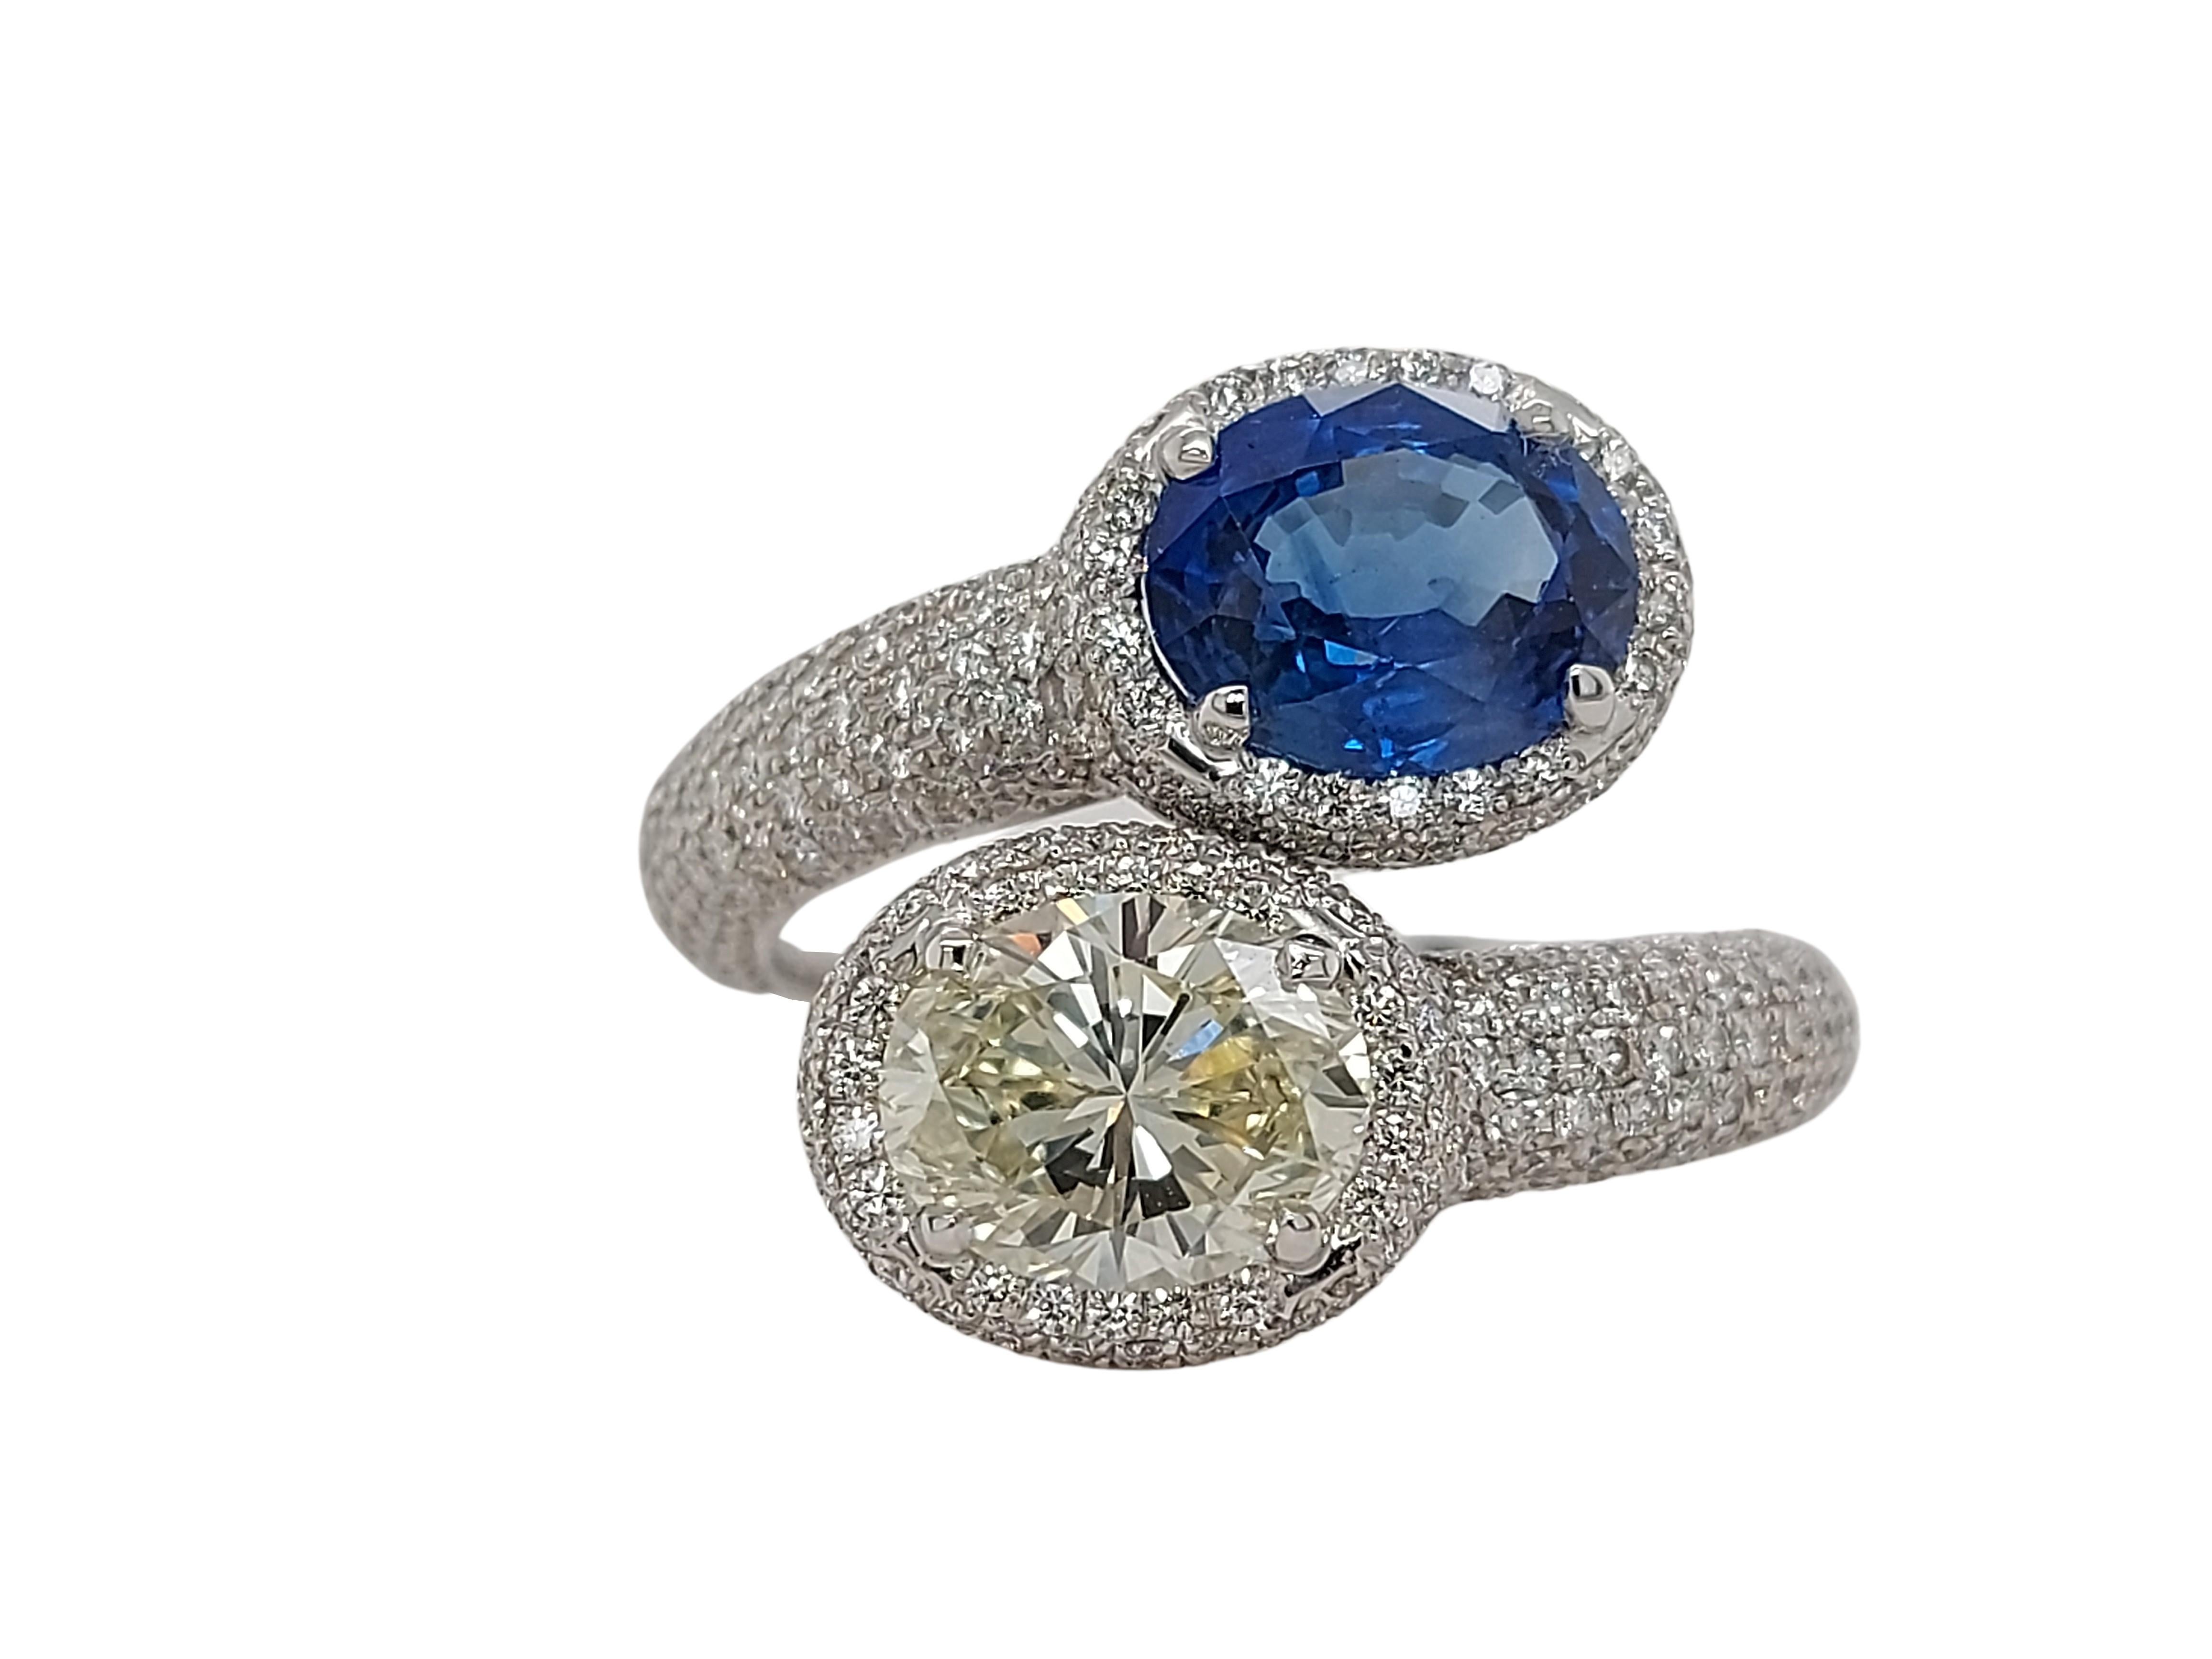 Stunning Toi et Moi 18kt White Gold Ring with a 2.63 Carat Sapphire, 1.67 Carat  For Sale 6